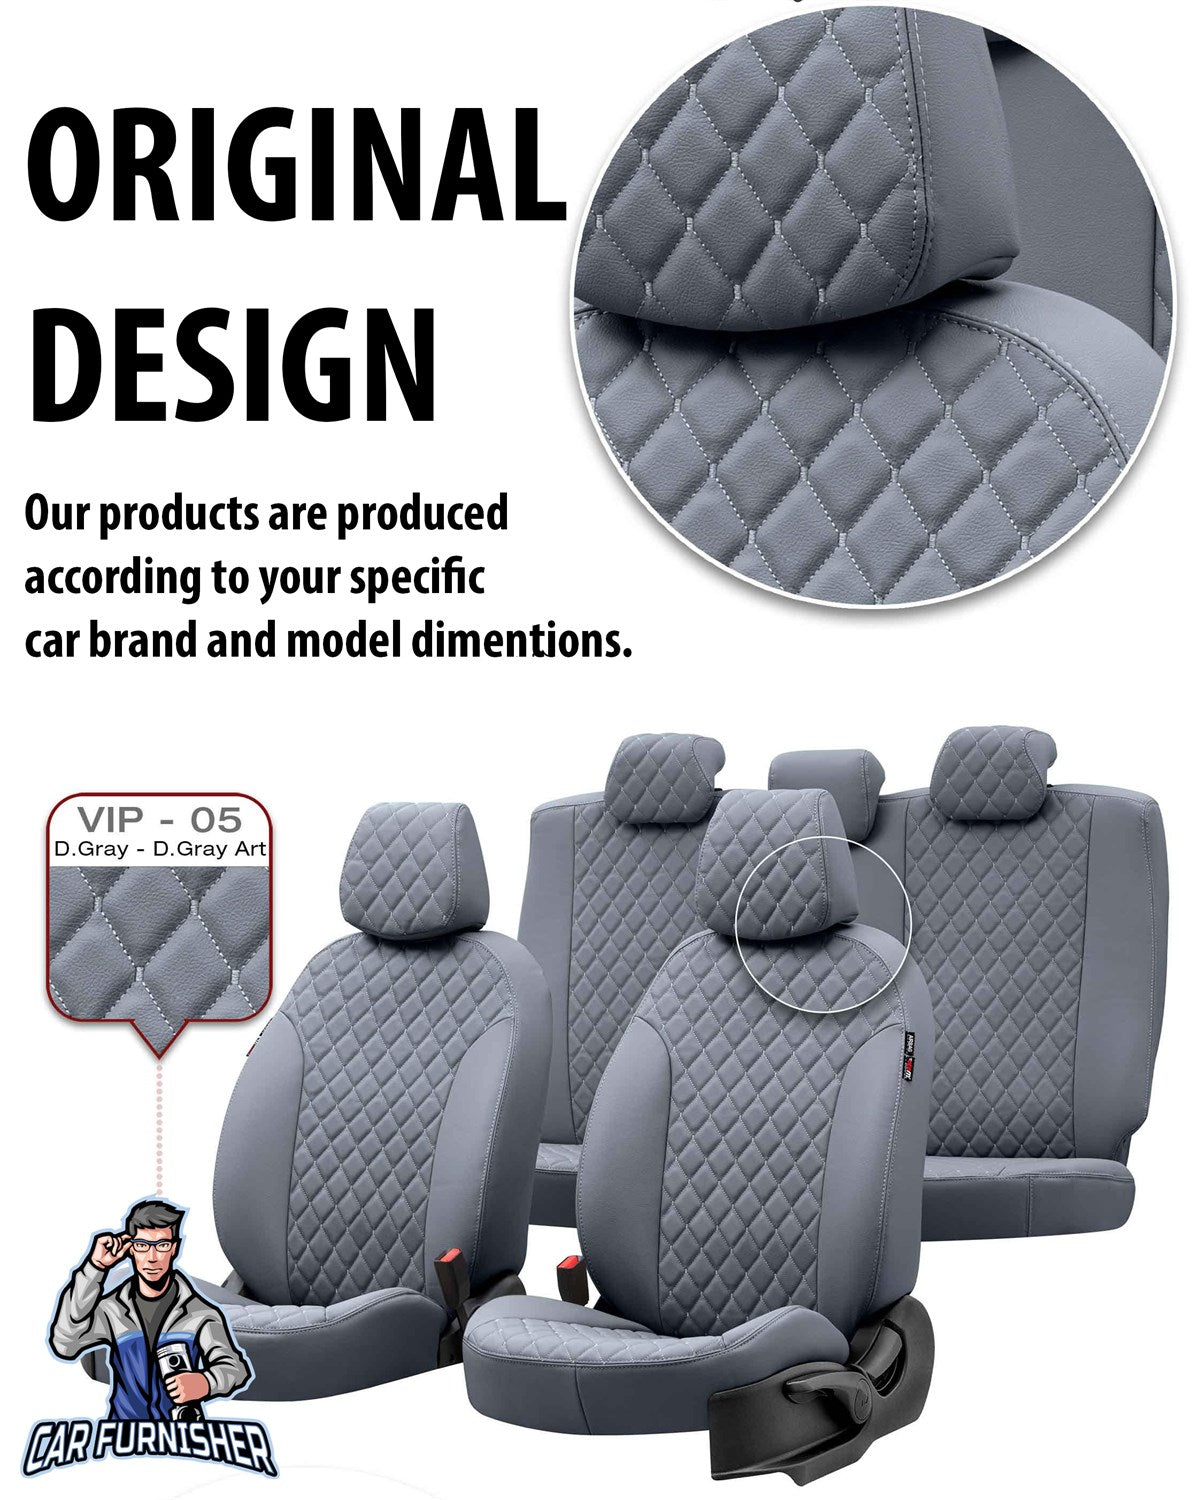 Fiat Doblo Seat Covers Madrid Leather Design Red Leather